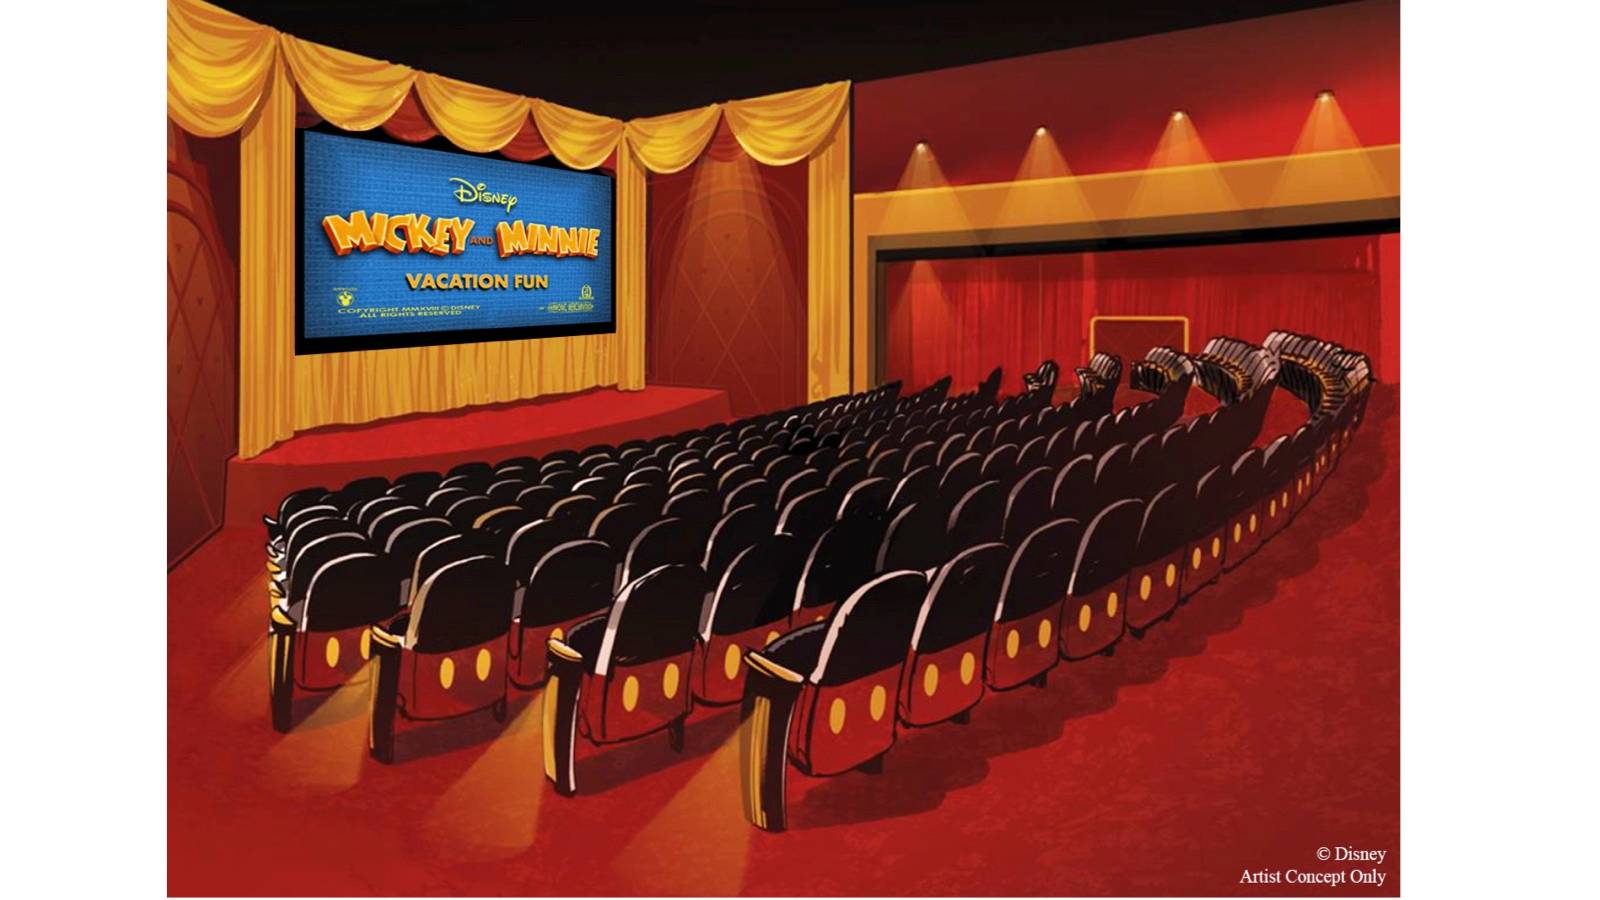 Mickey Shorts Theater to open March 4 with original animated short